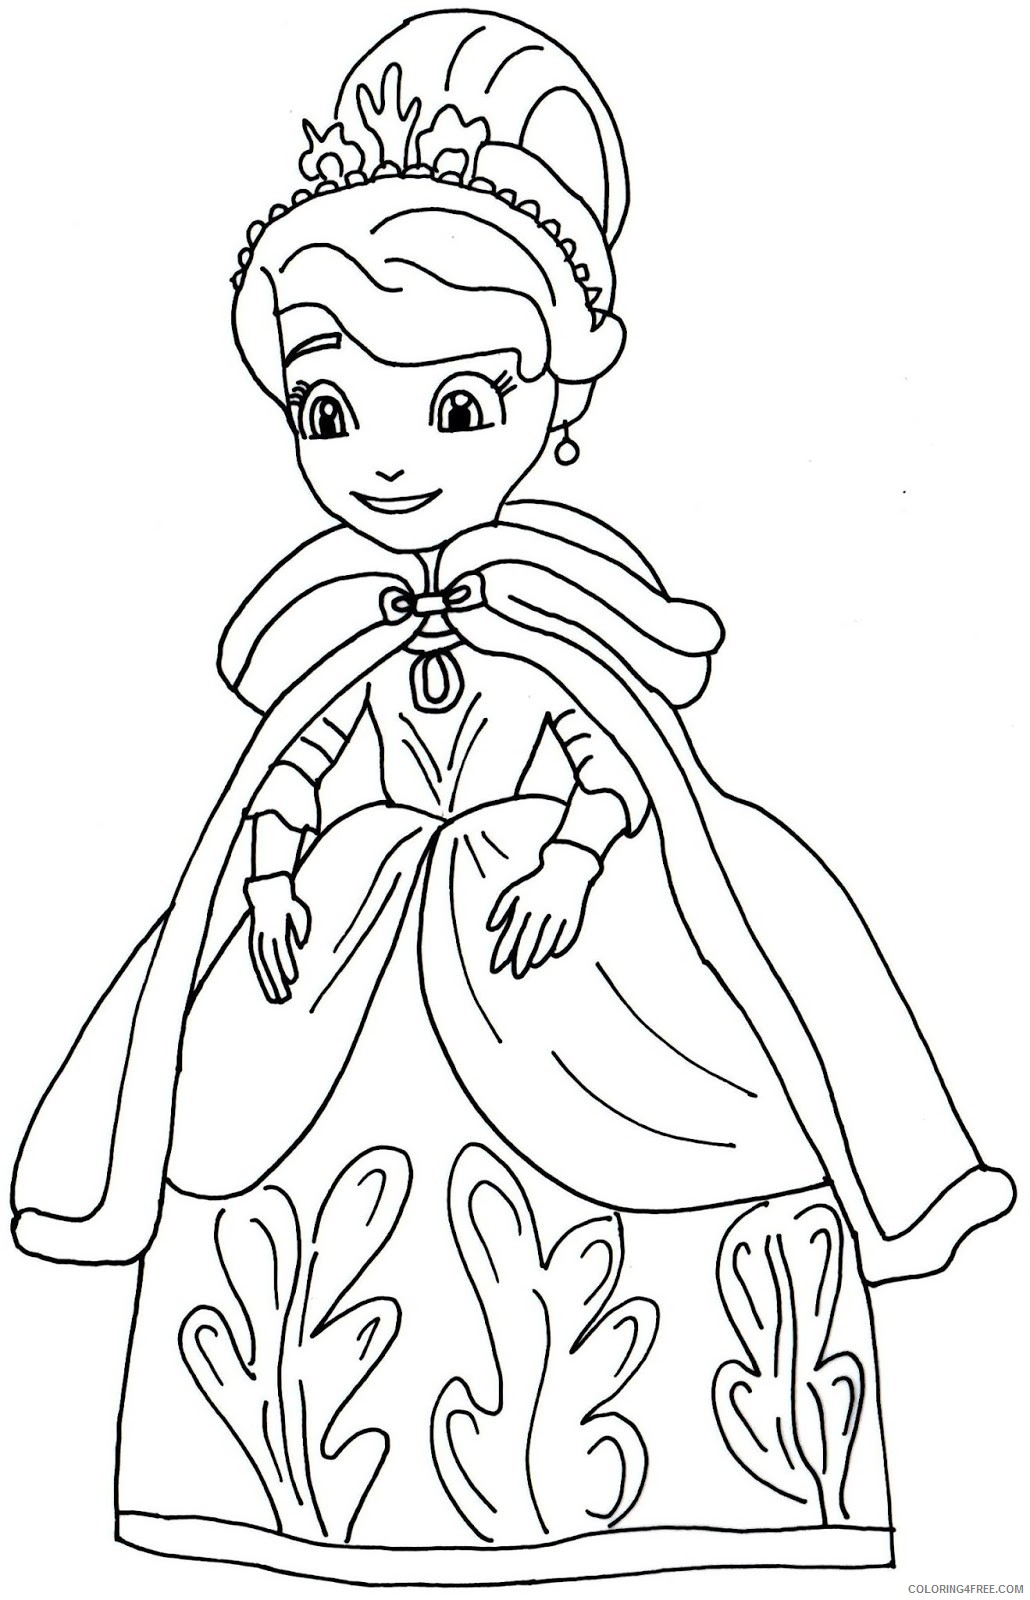 sofia the first coloring pages winter dress Coloring4free